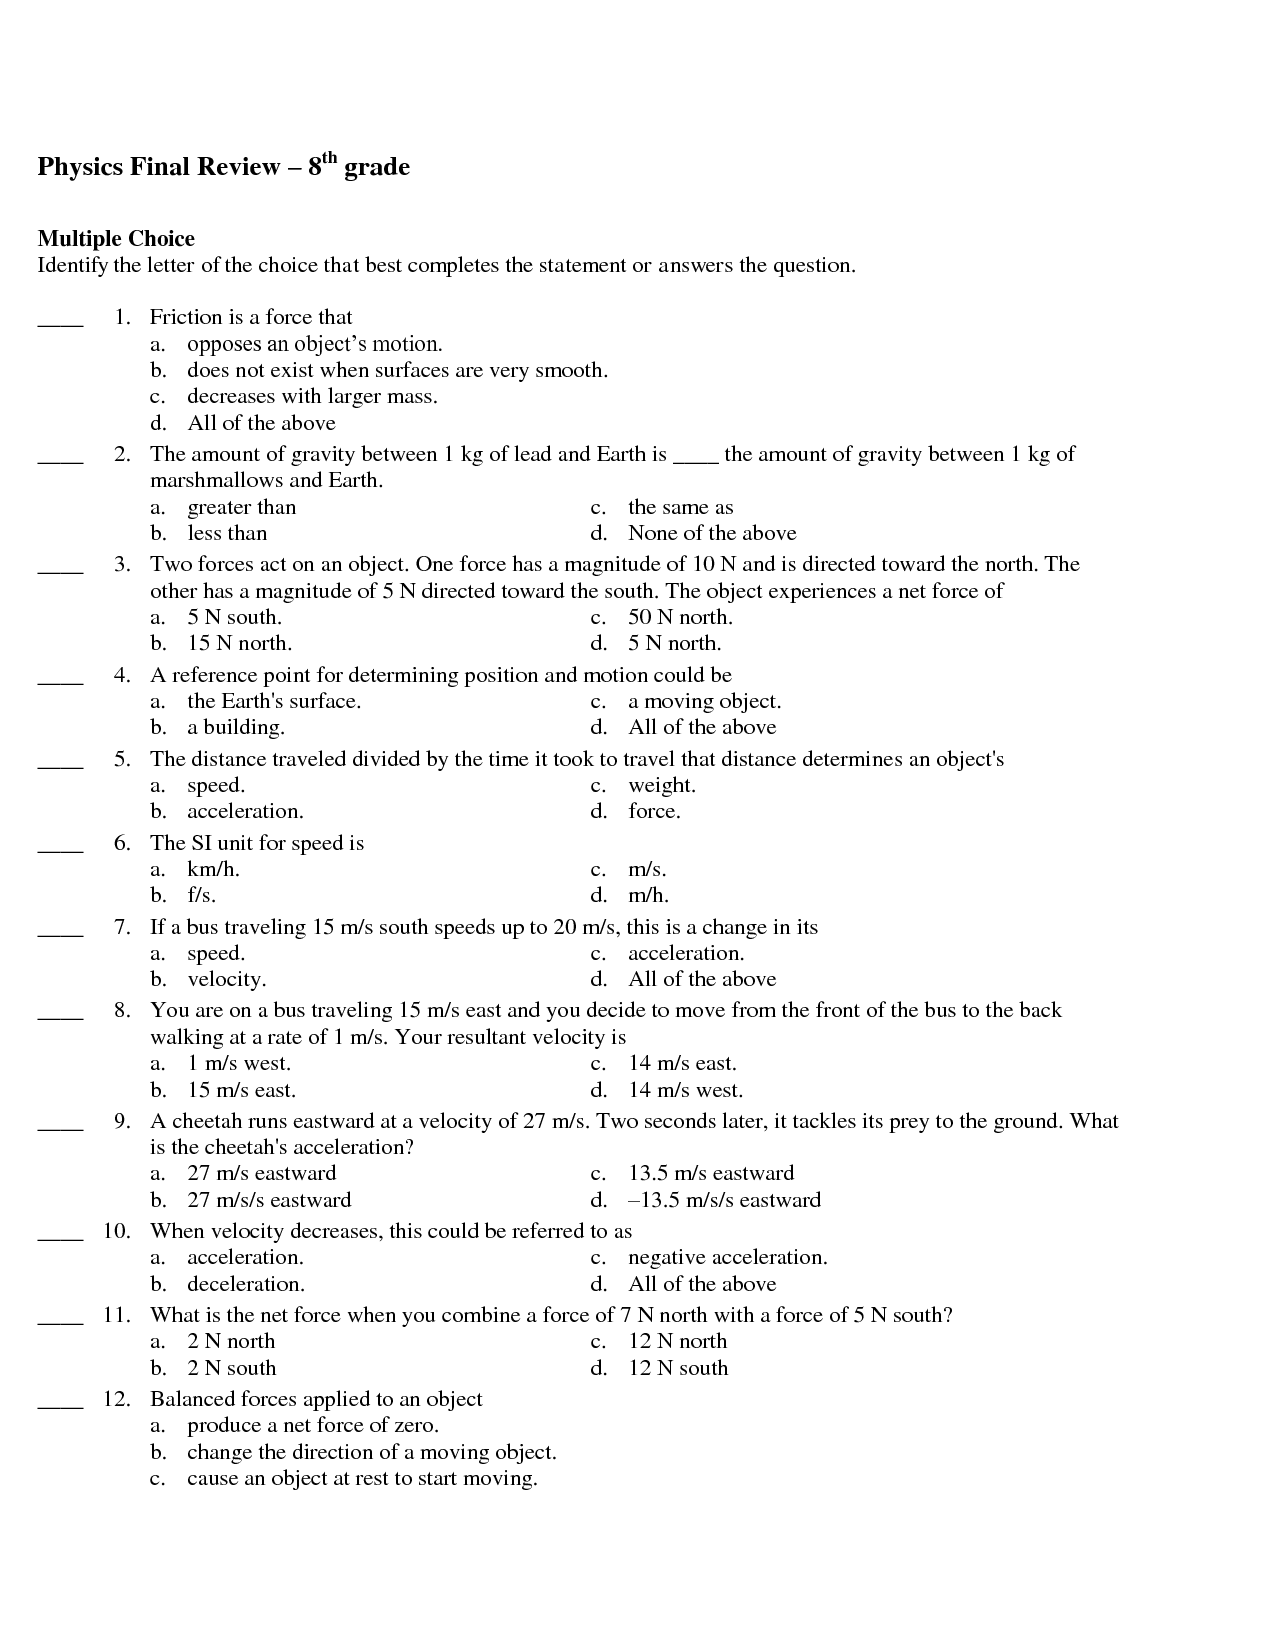 10-best-images-of-6-grade-science-worksheets-6th-grade-science